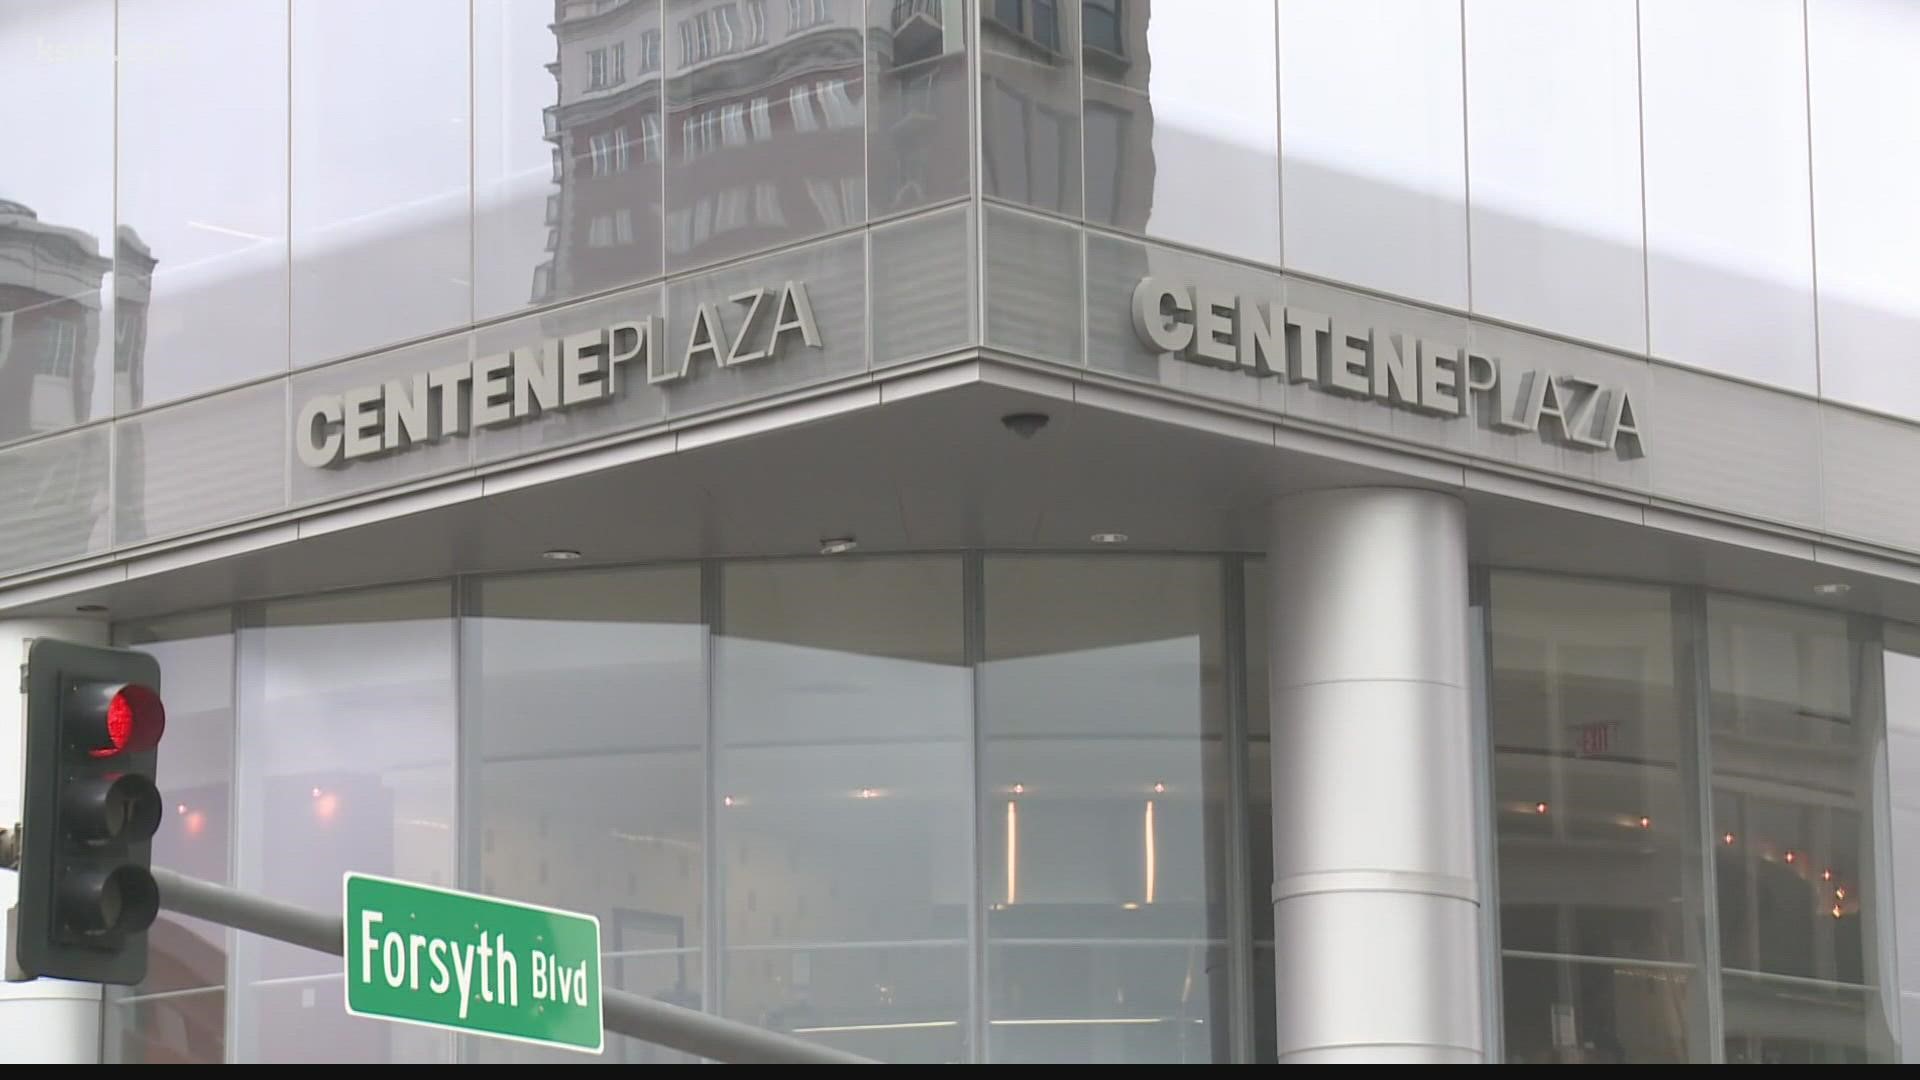 Centene said it is delaying the first phase of its "return to in-person engagement" from Sept. 13 until Oct. 18